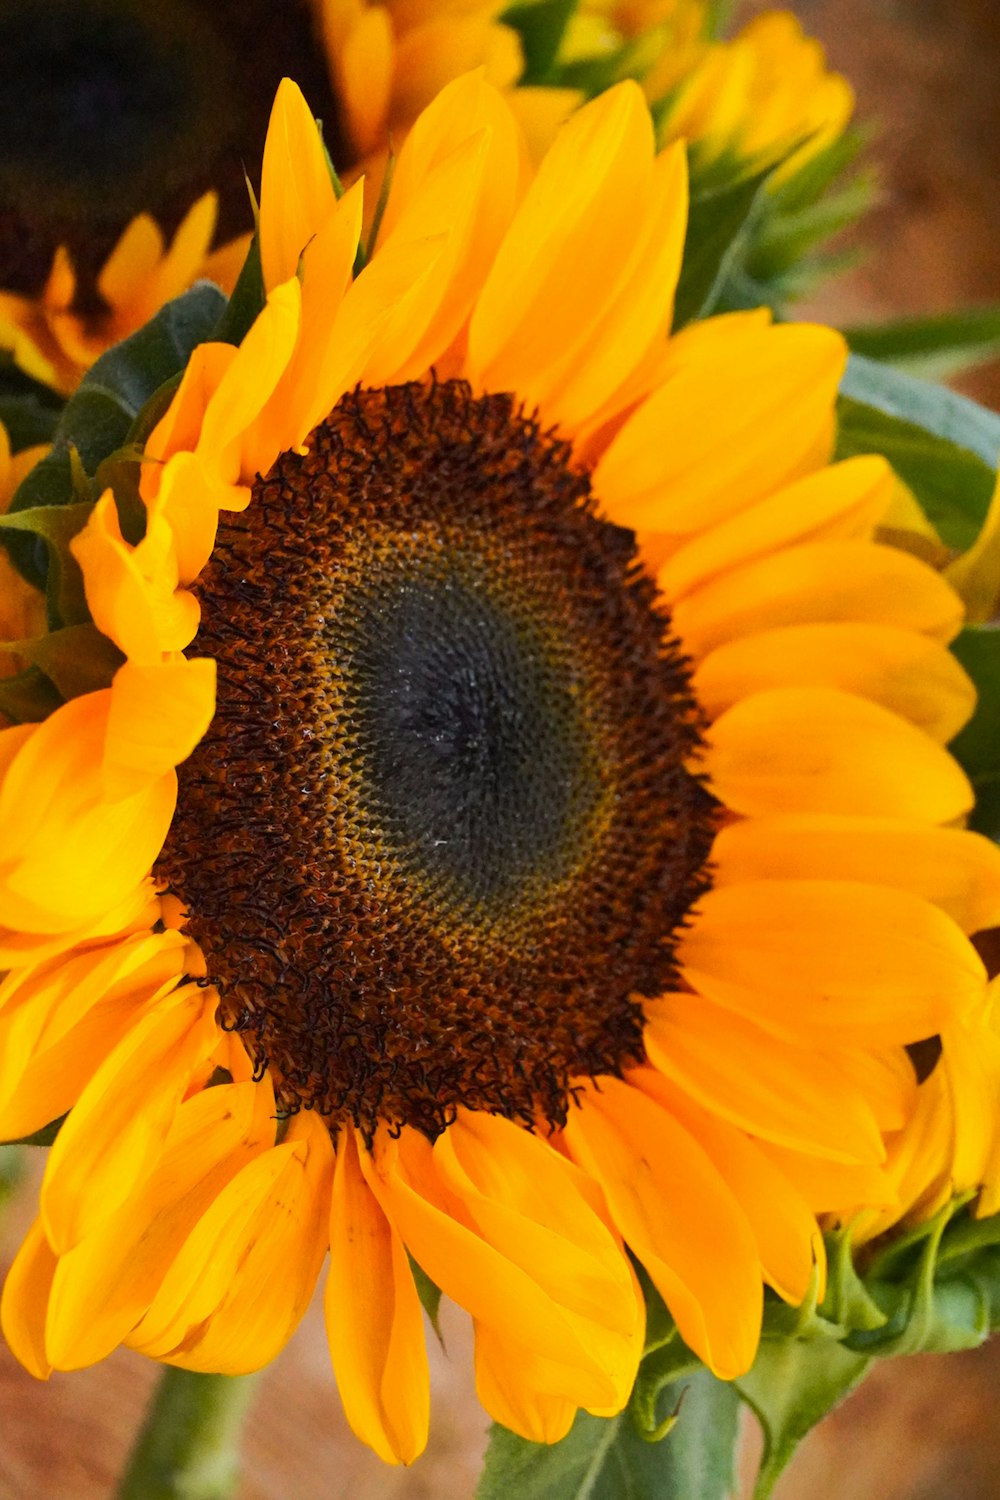 a close up of a yellow sunflower with green leaves